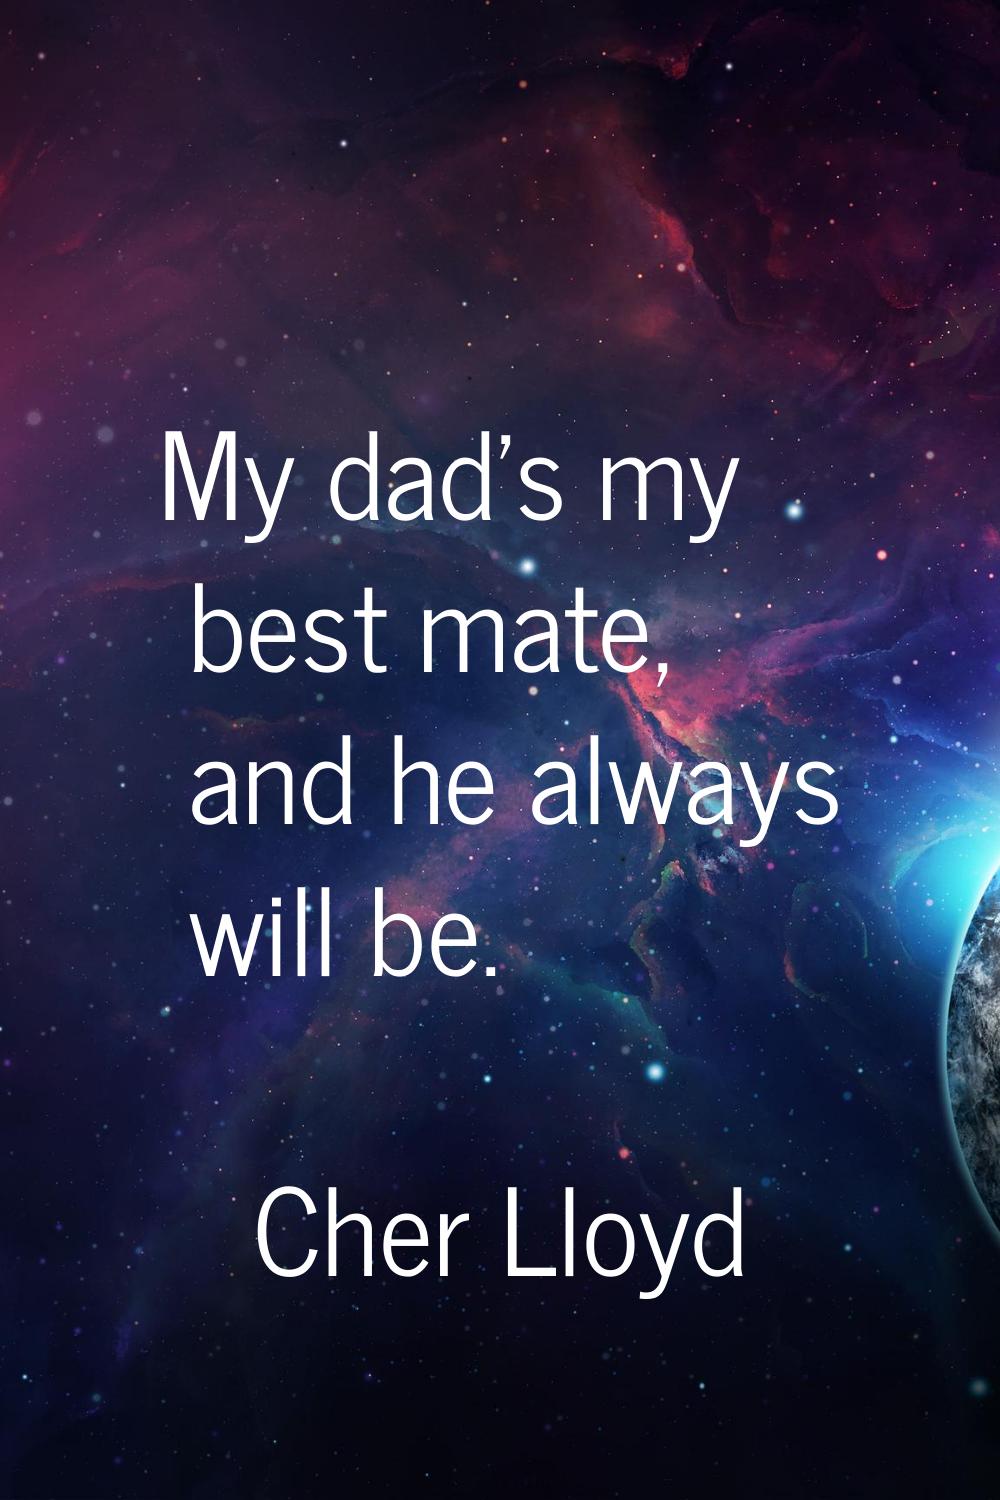 My dad's my best mate, and he always will be.